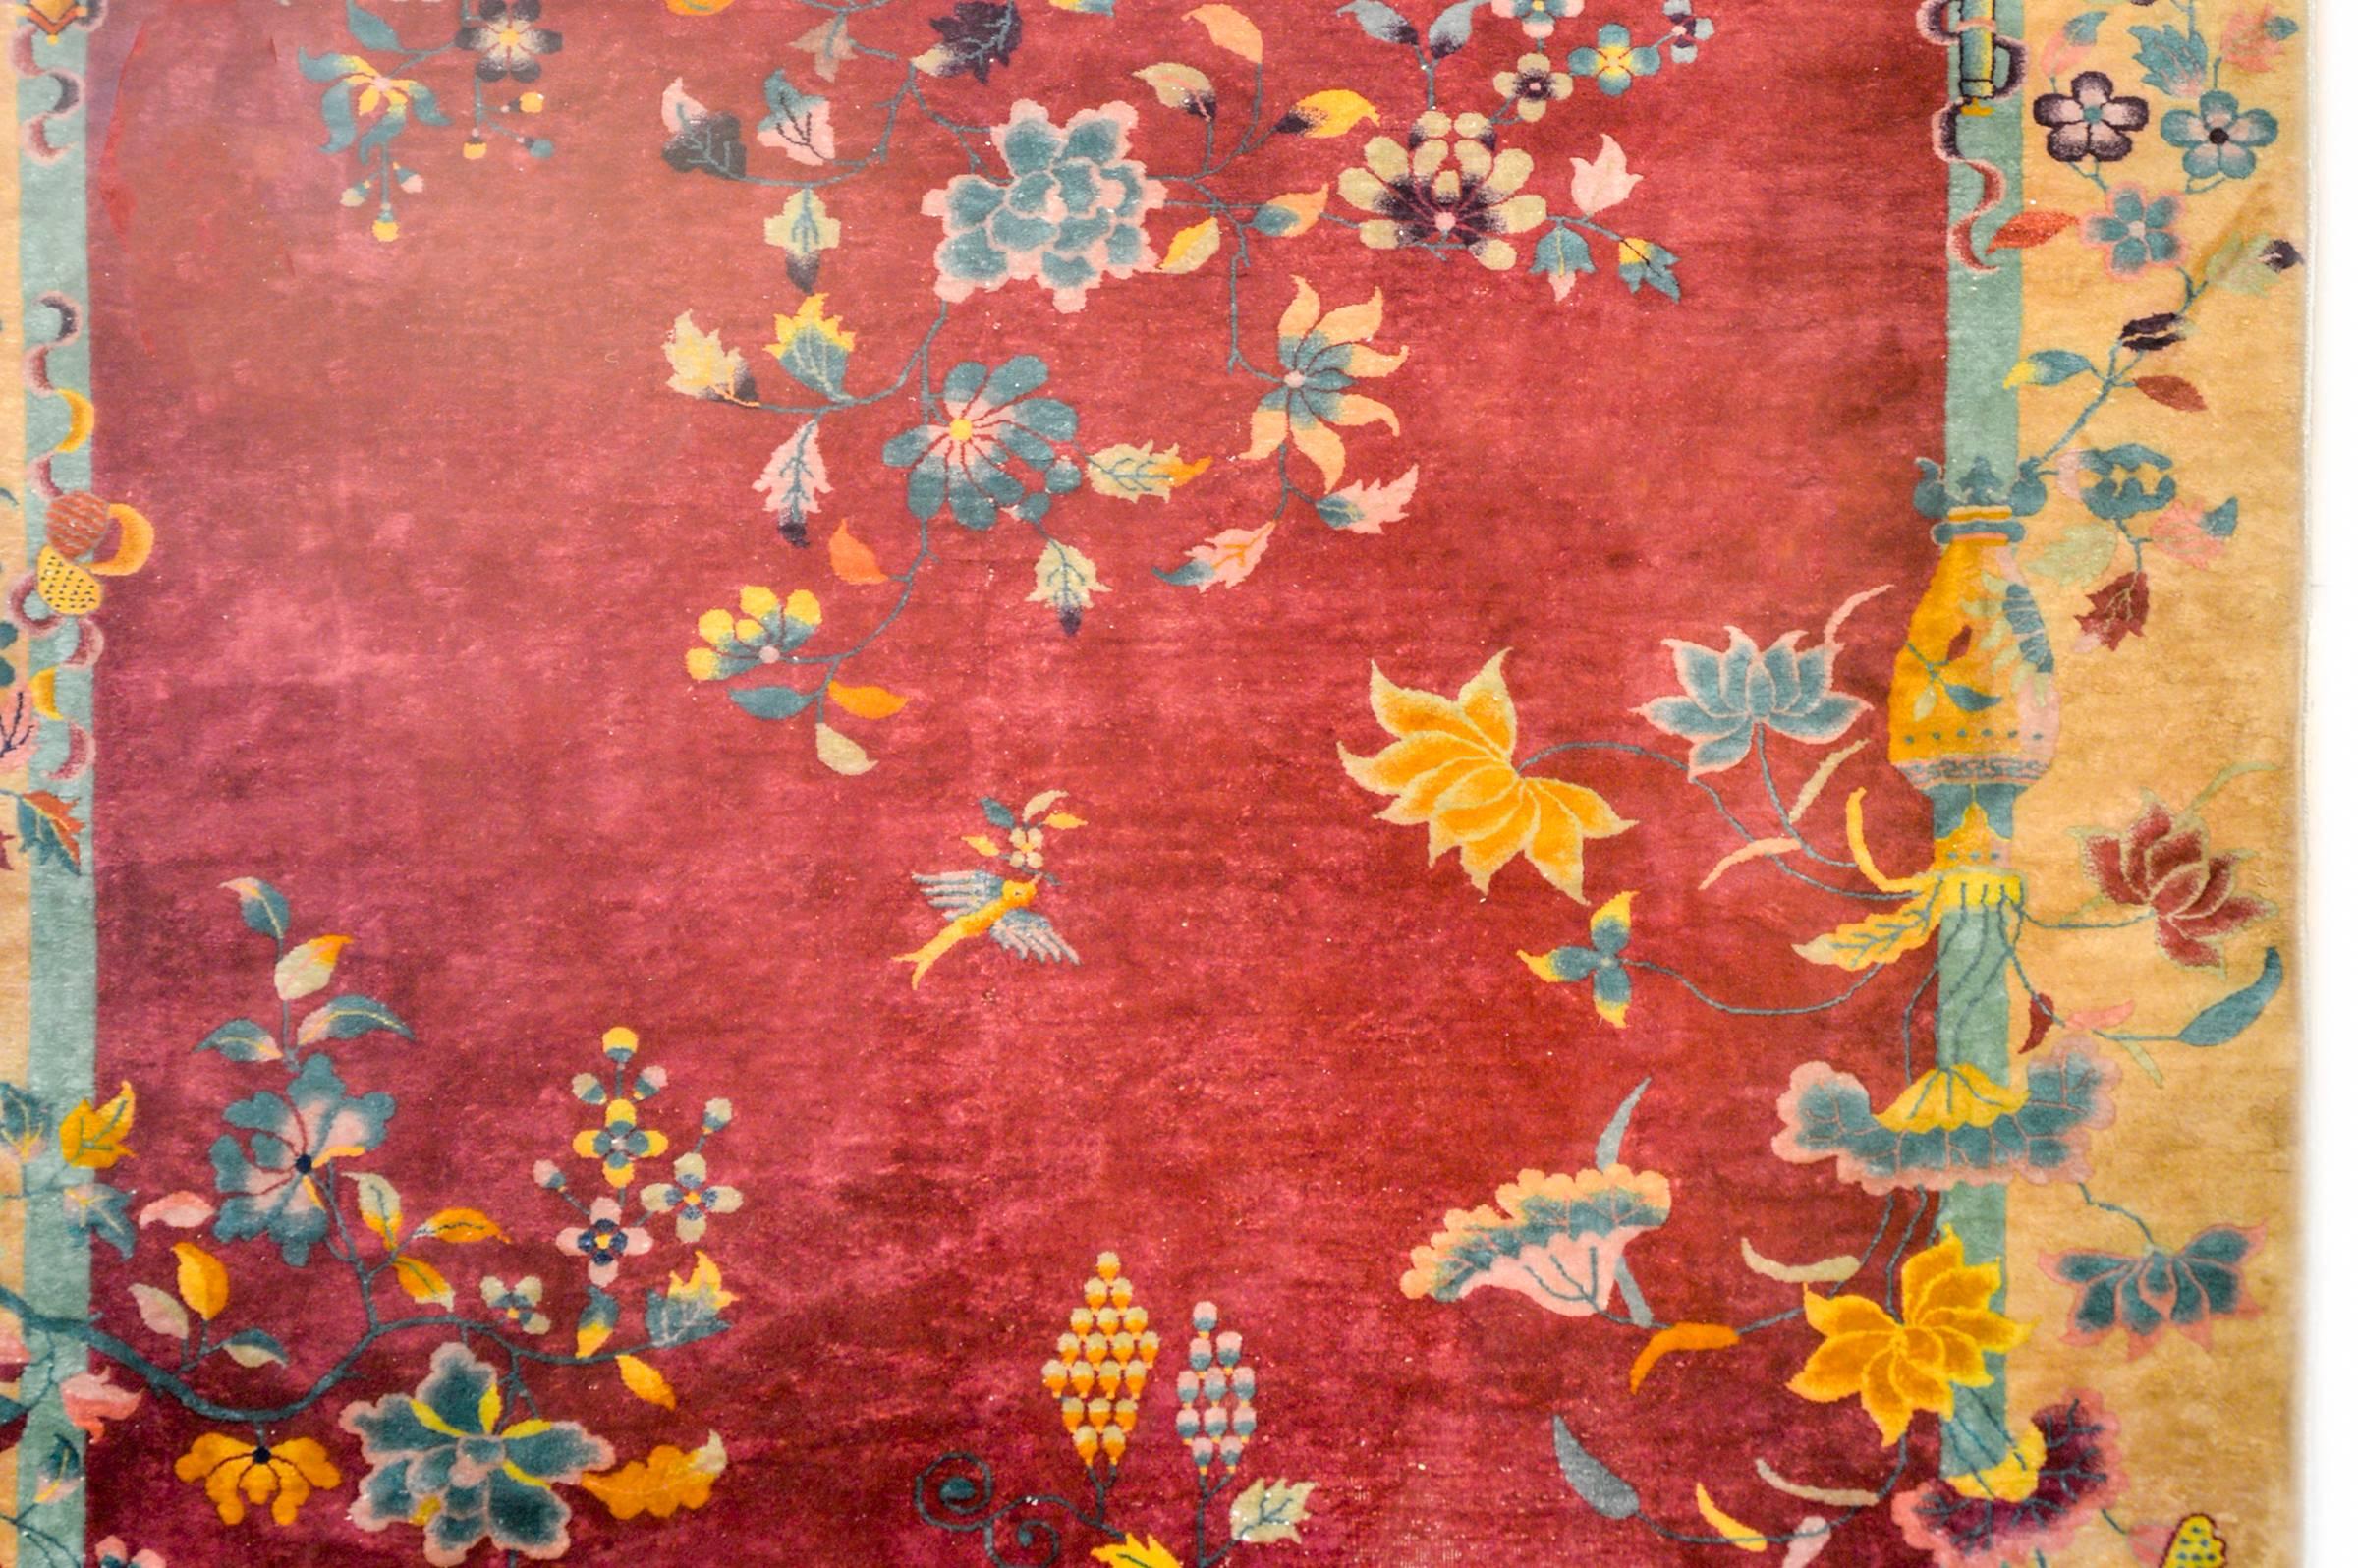 An exceptional early 20th century Chinese Art Deco rug with a beautiful deep cranberry background, and a pale gold border. There are myriad multicolored auspicious potted vases with auspicious flowers like chrysanthemums, peonies, lotus, and cherry